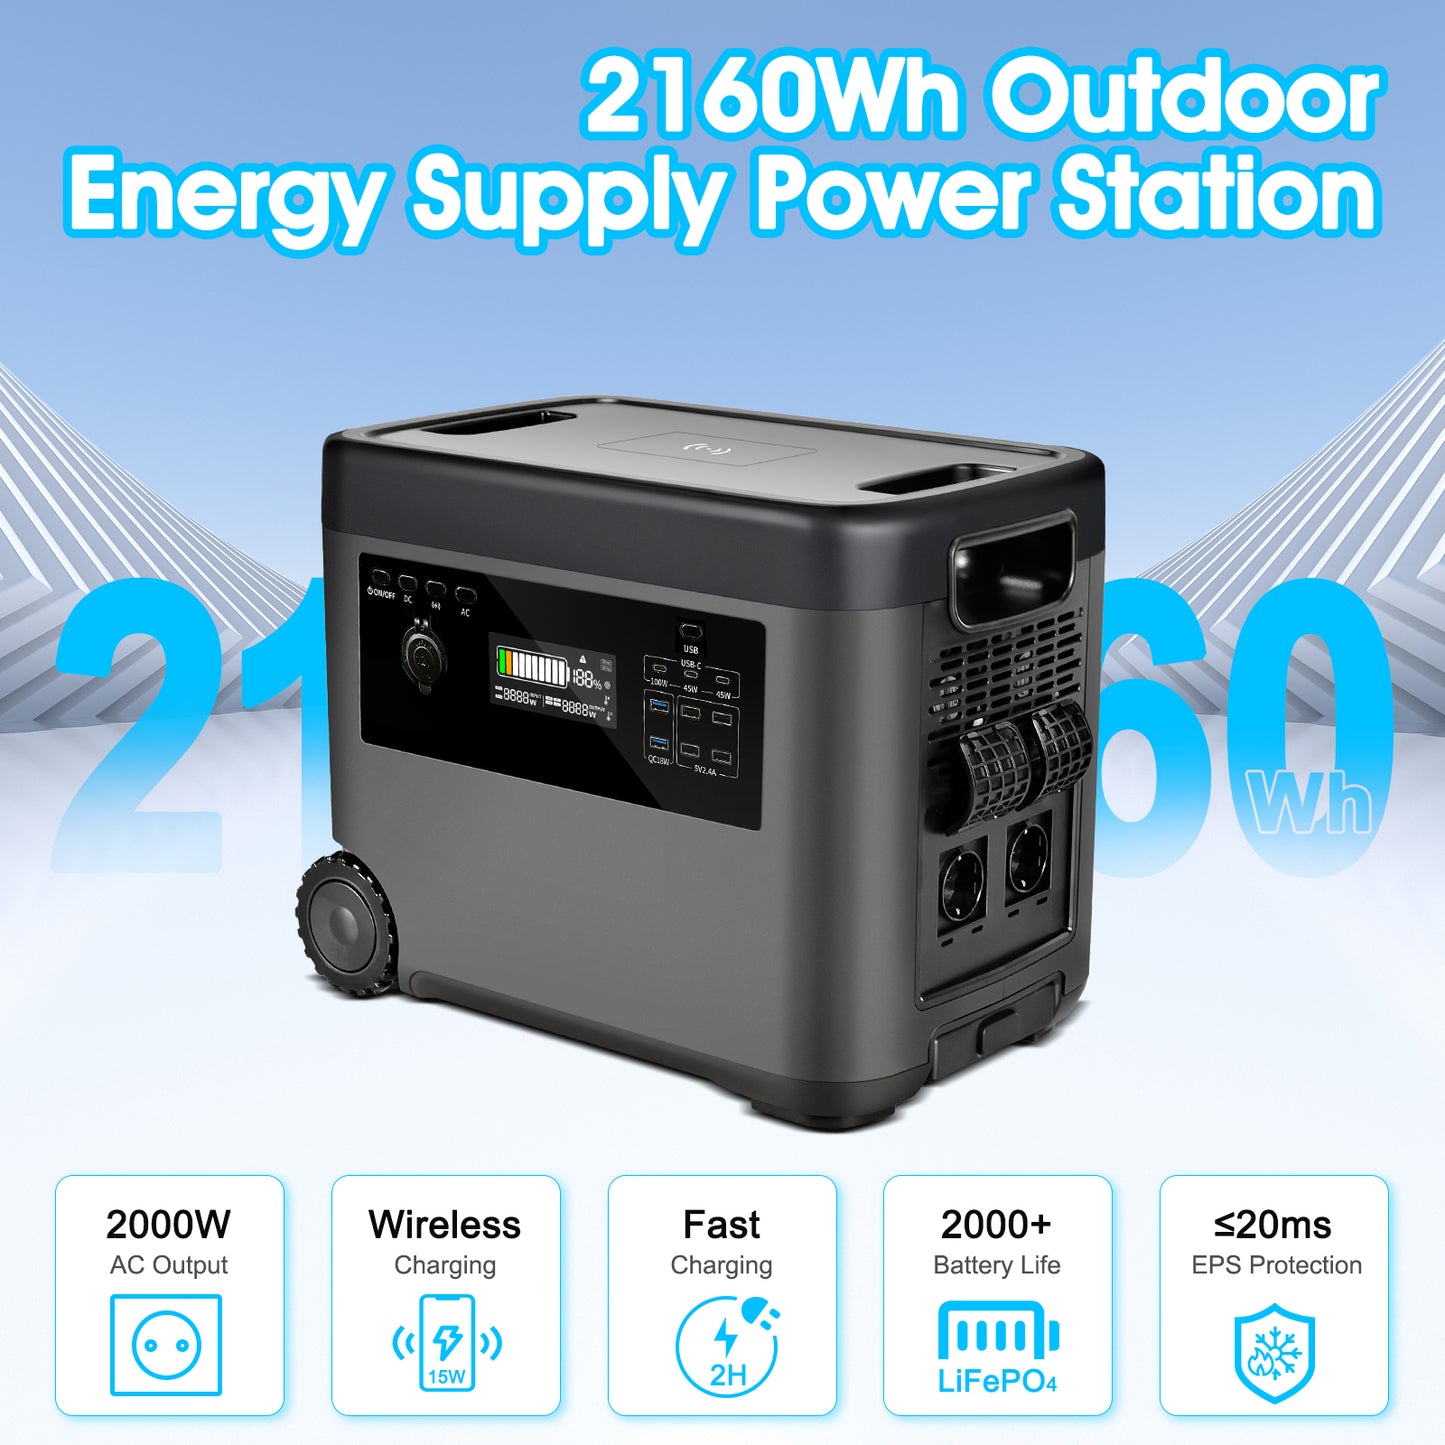 BTMETER Portable Power Station Trolley Pulley Design, 2160 Wh Solar Generator 2000W AC Output for Outdoor Camping, Home Backup, Emergency